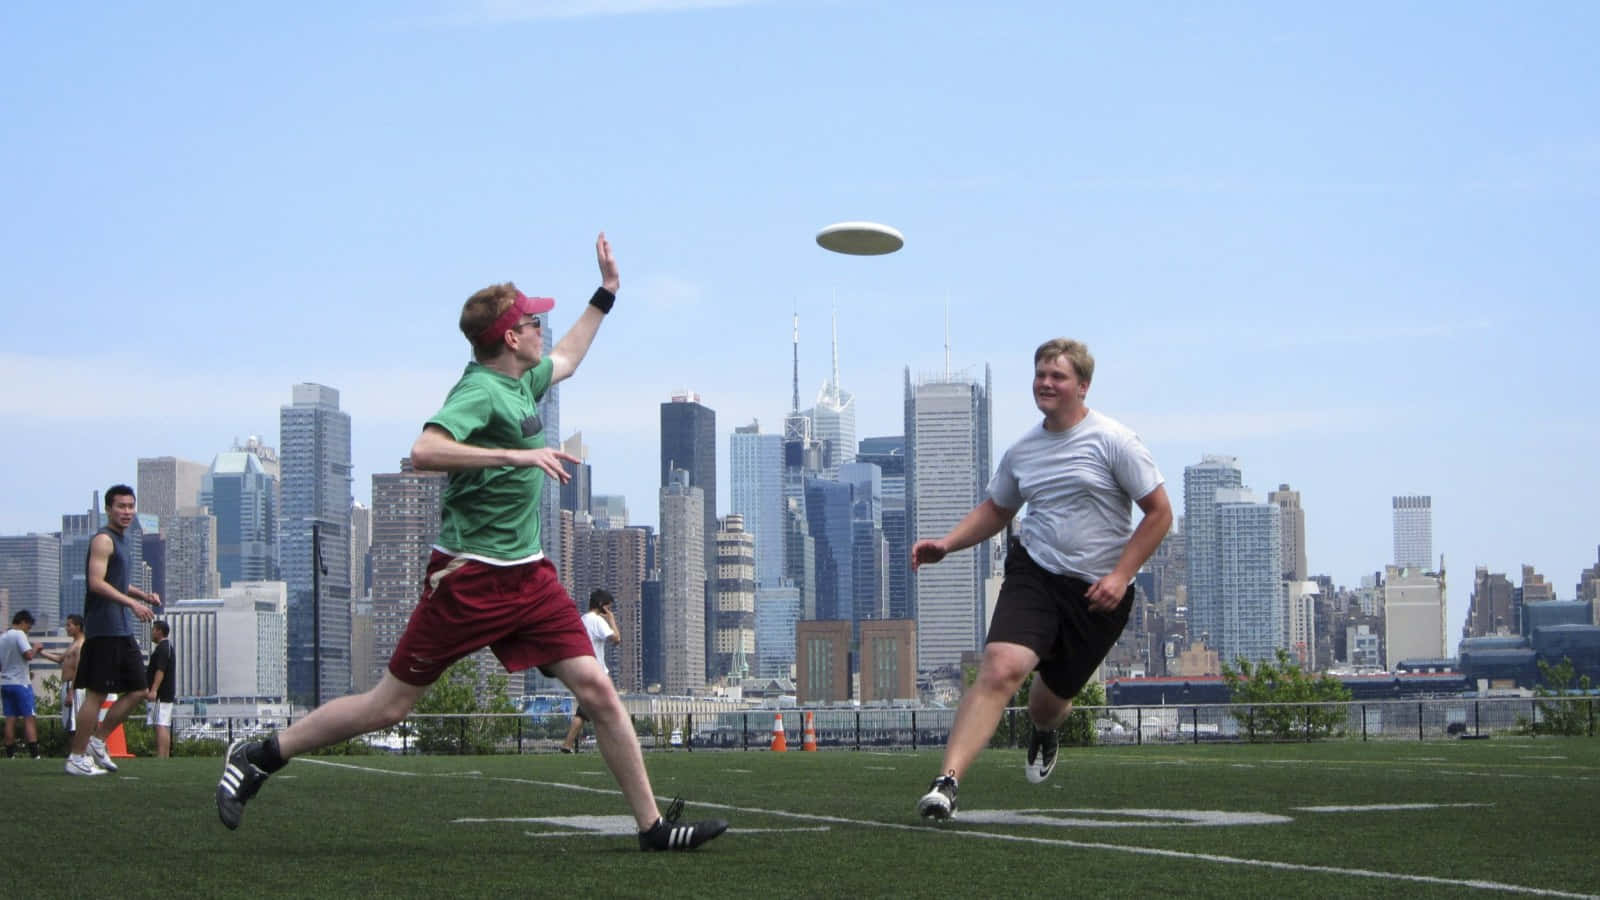 Intense Ultimate Frisbee Game in Action